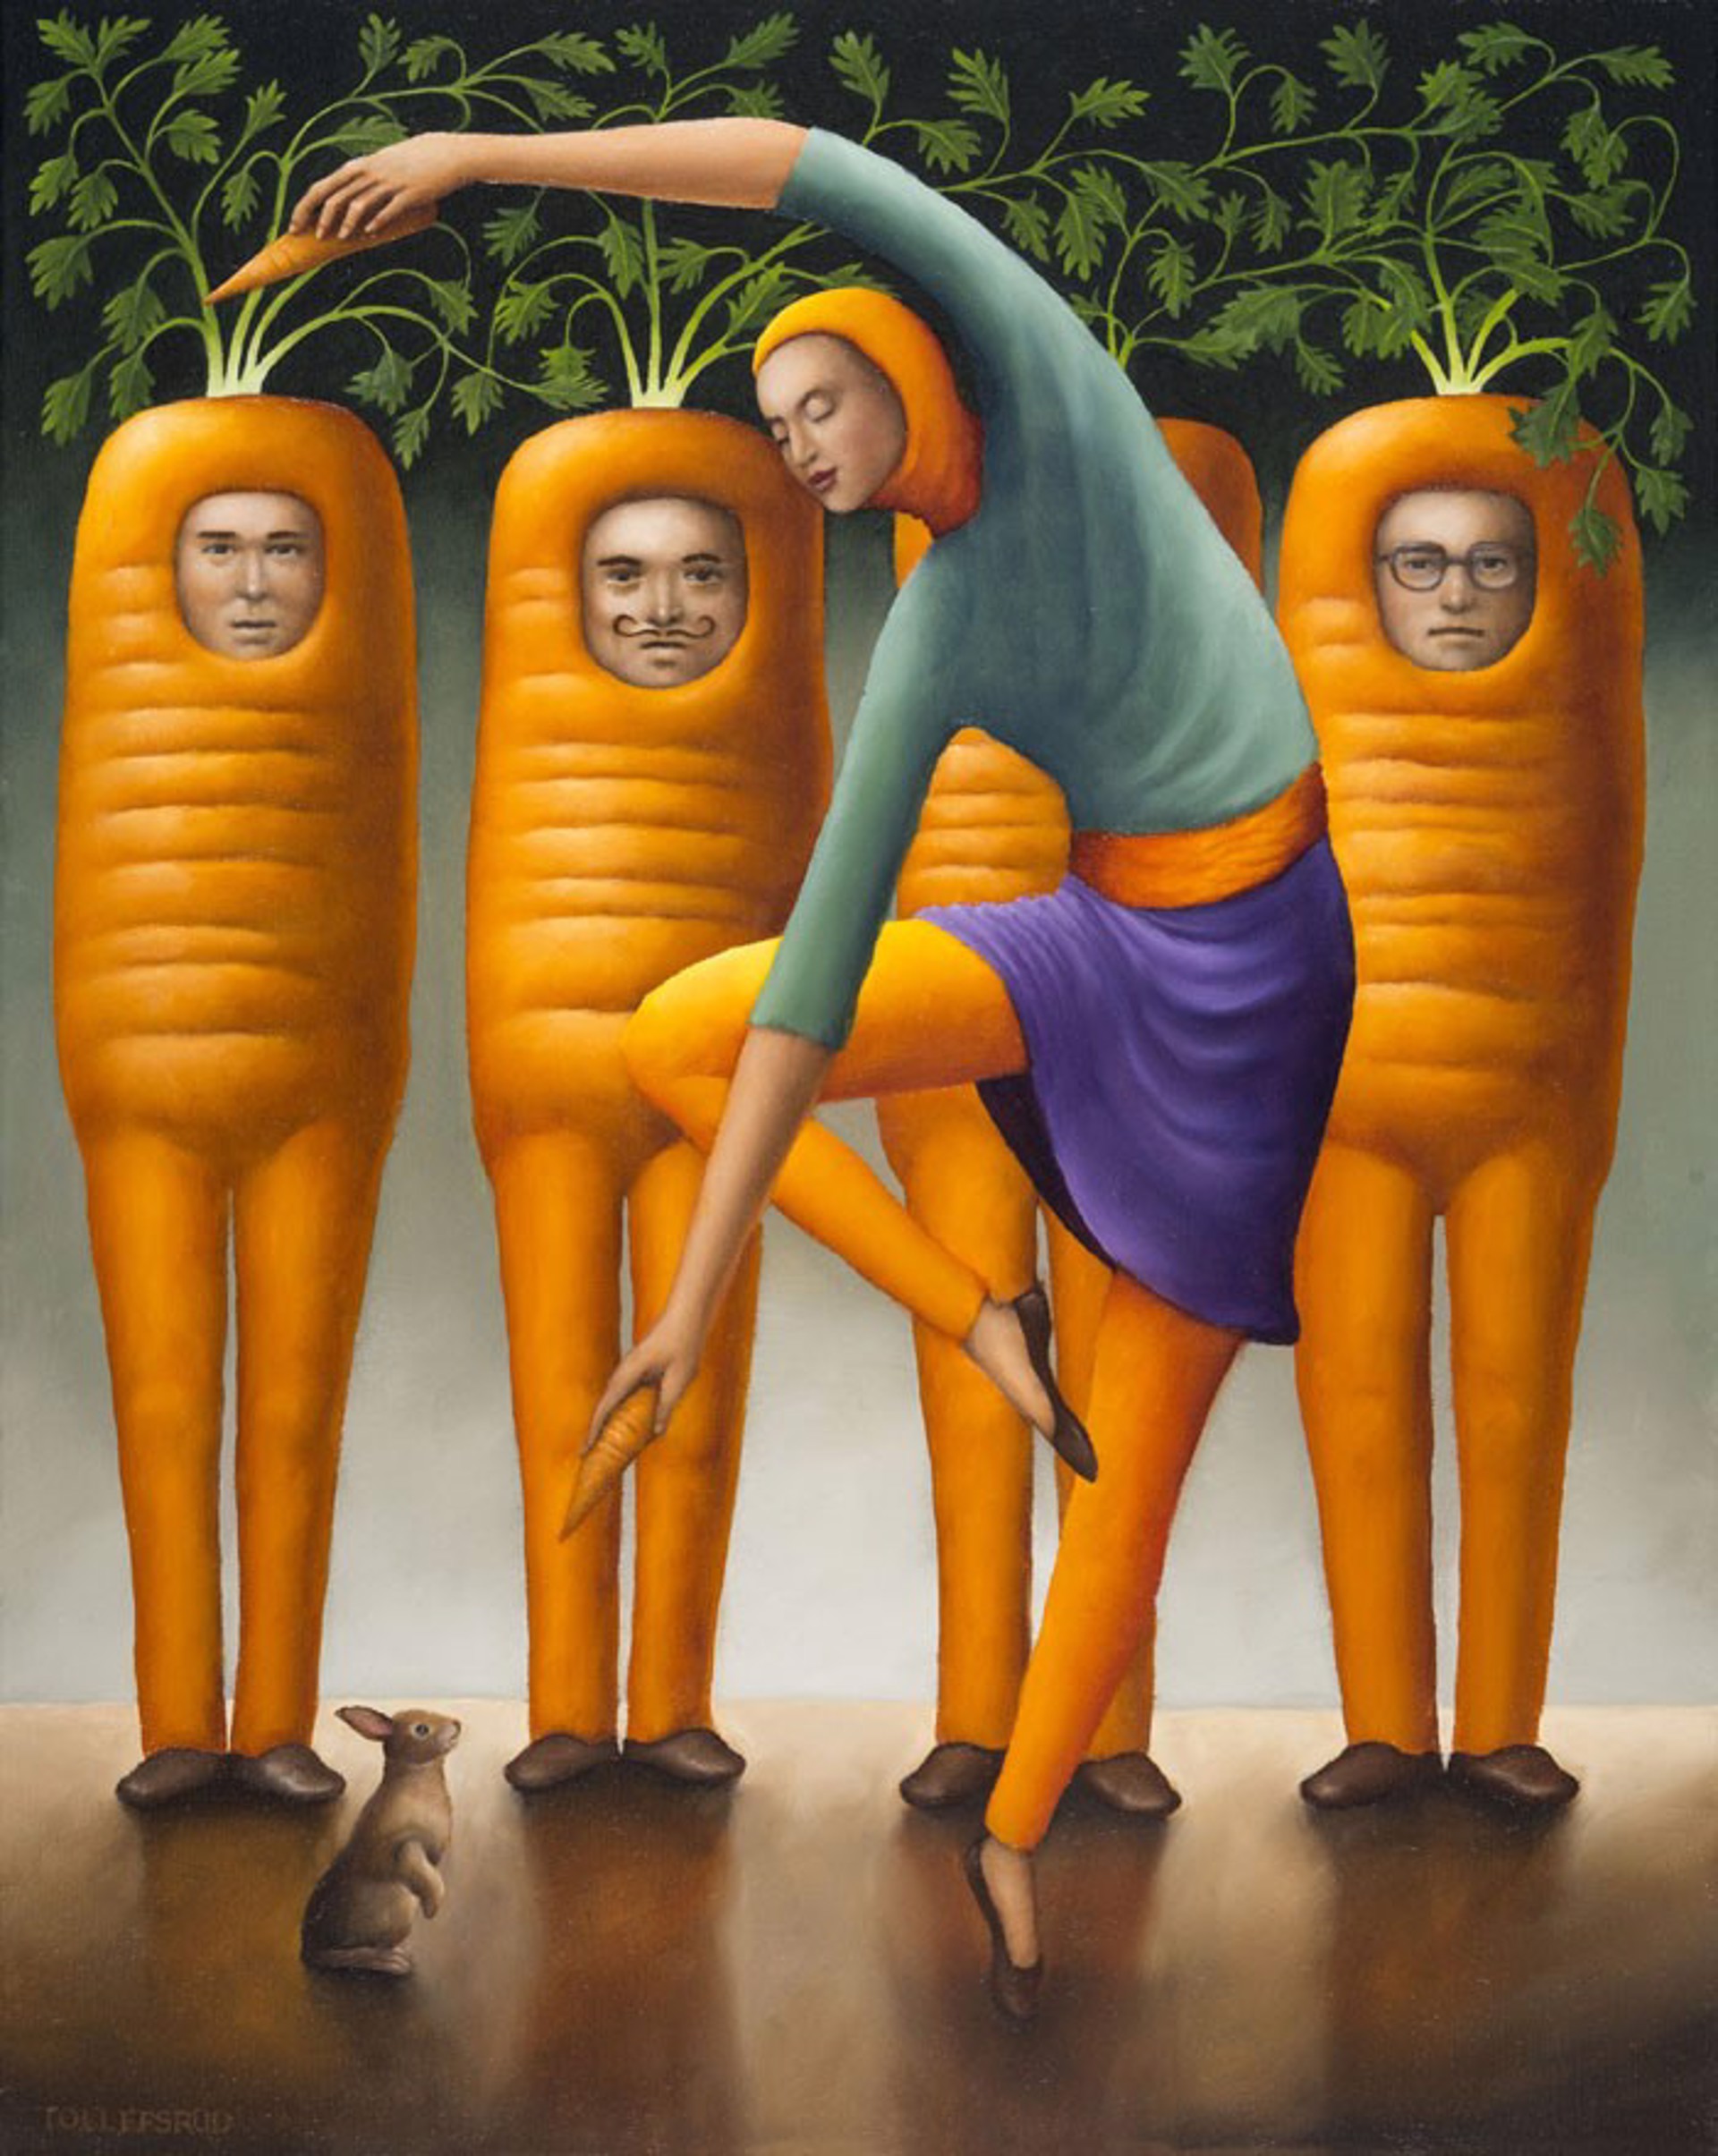 Cavorting Amongst Carrots by Cynthia Tollefsrud